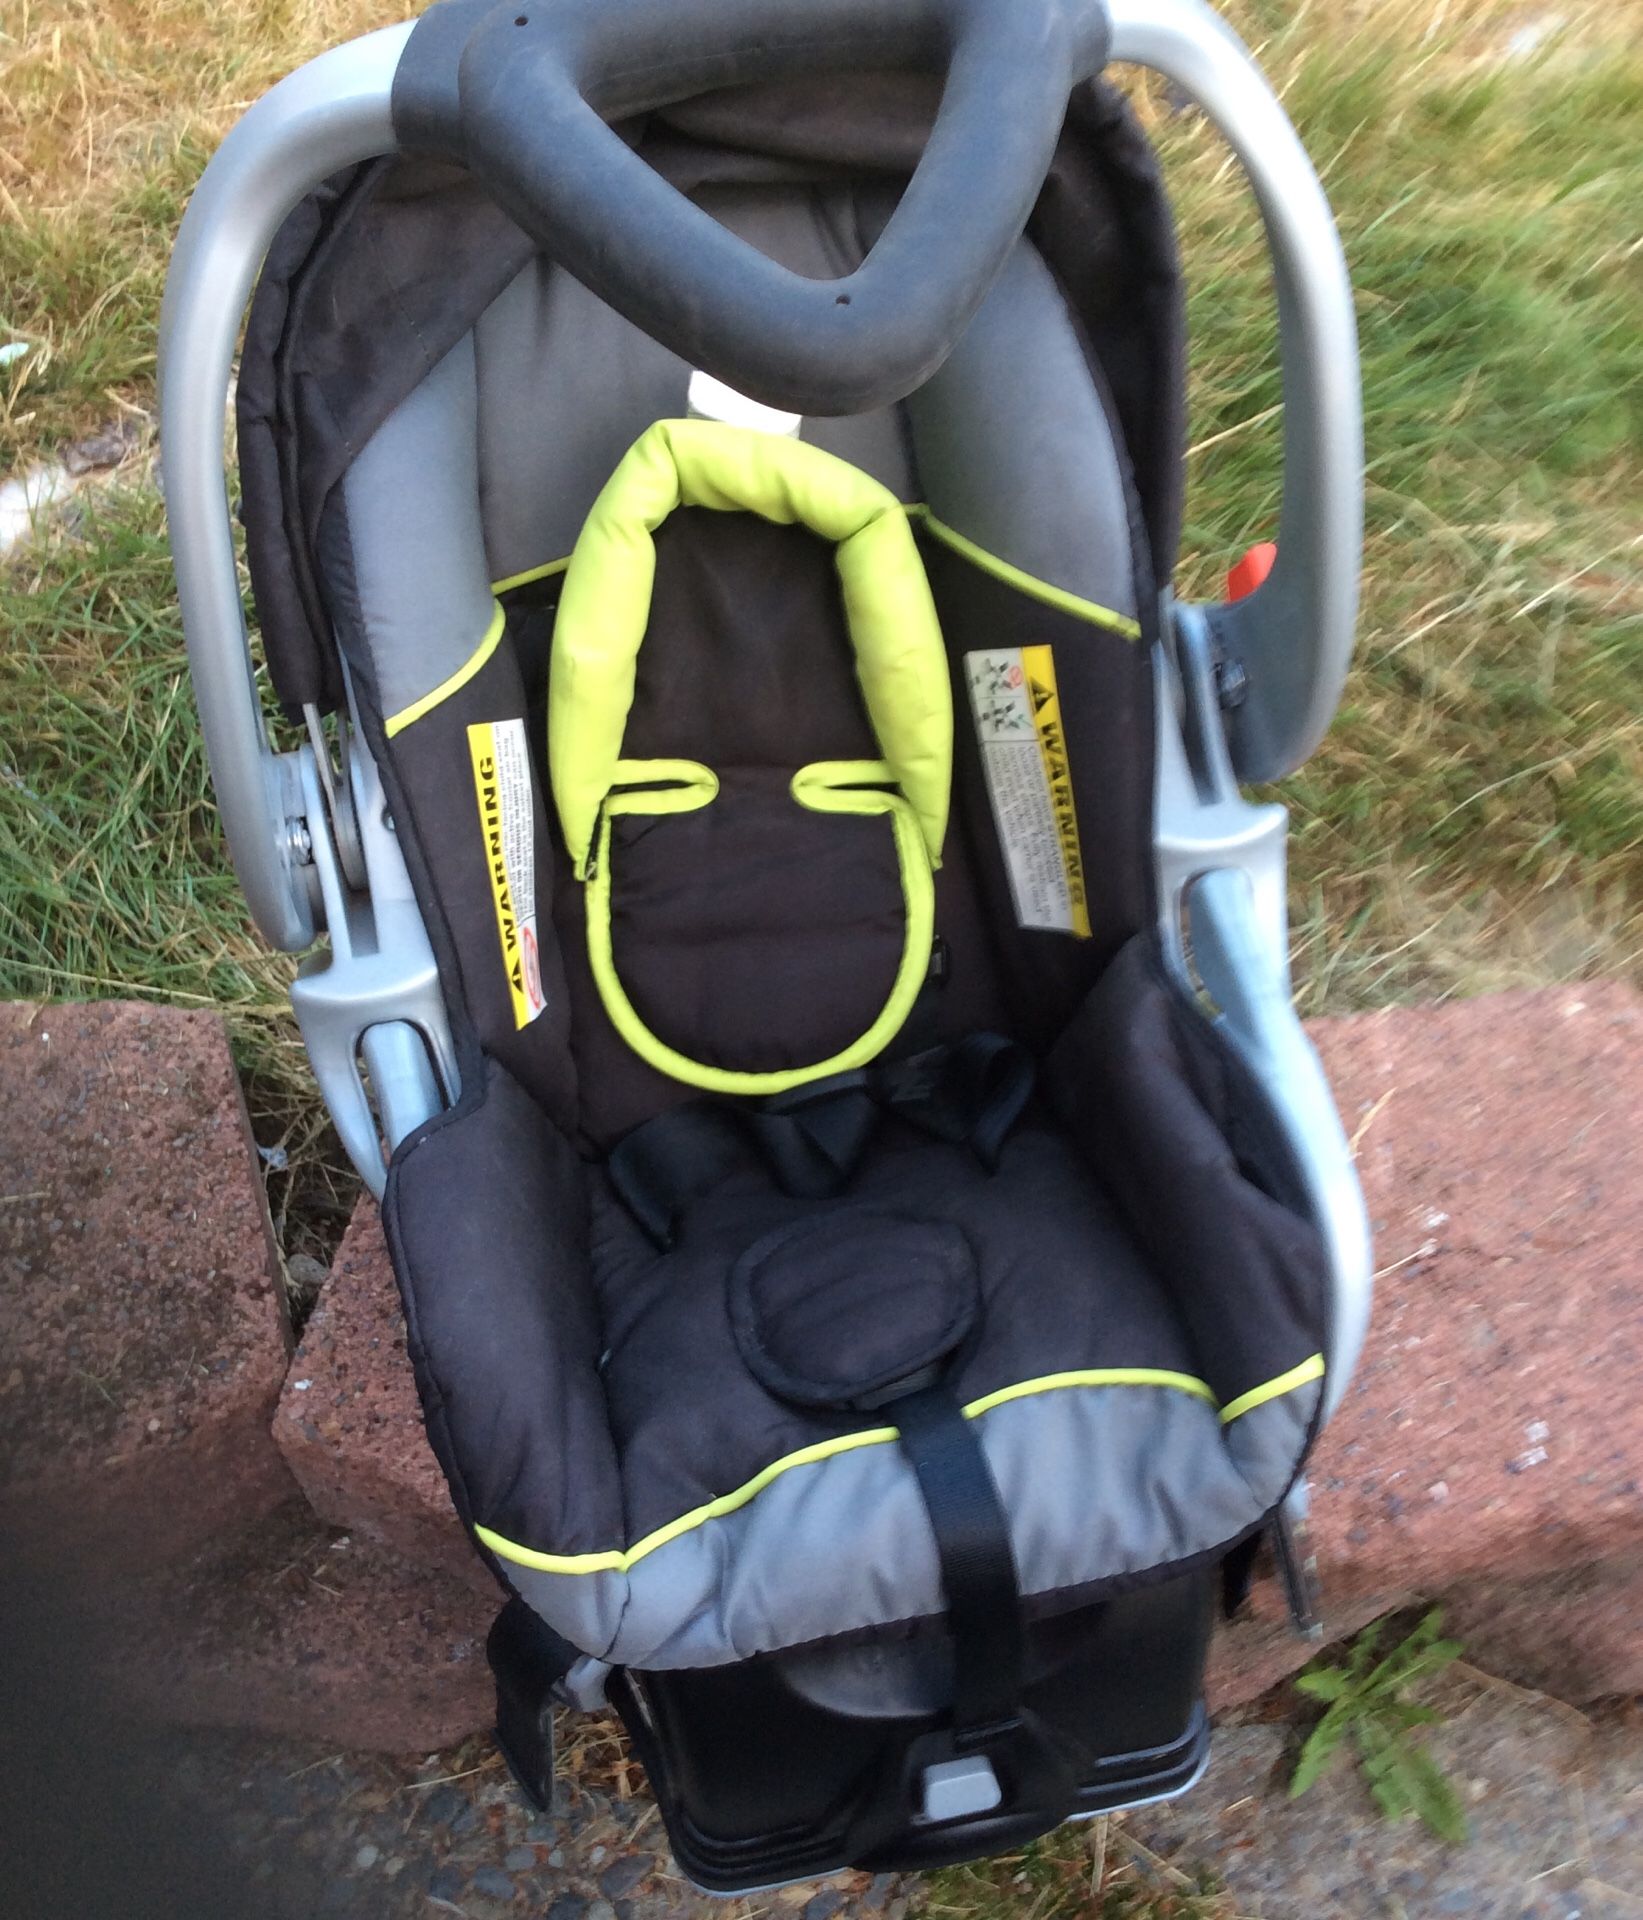 Baby trend infant car seat w/. Easy connect base. Price. 15$. Pick. Up. E. 72nd. Tacoma